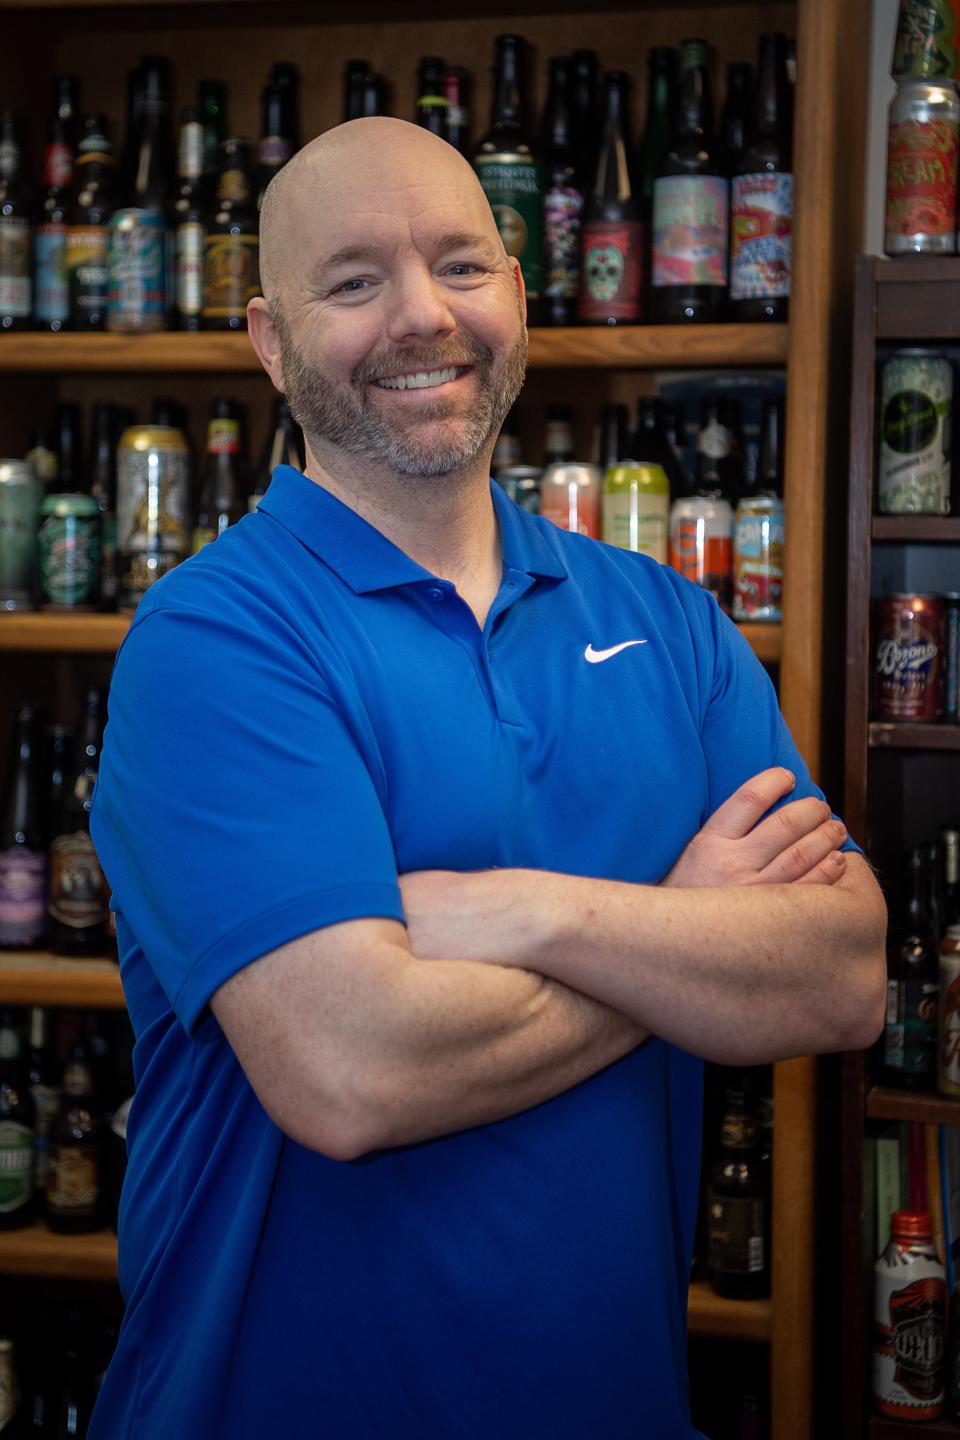 Jeff Irvin – more commonly known as “Puff” – who’s served as the department chair and the Craft Beverage Institute of the Southeast's director.